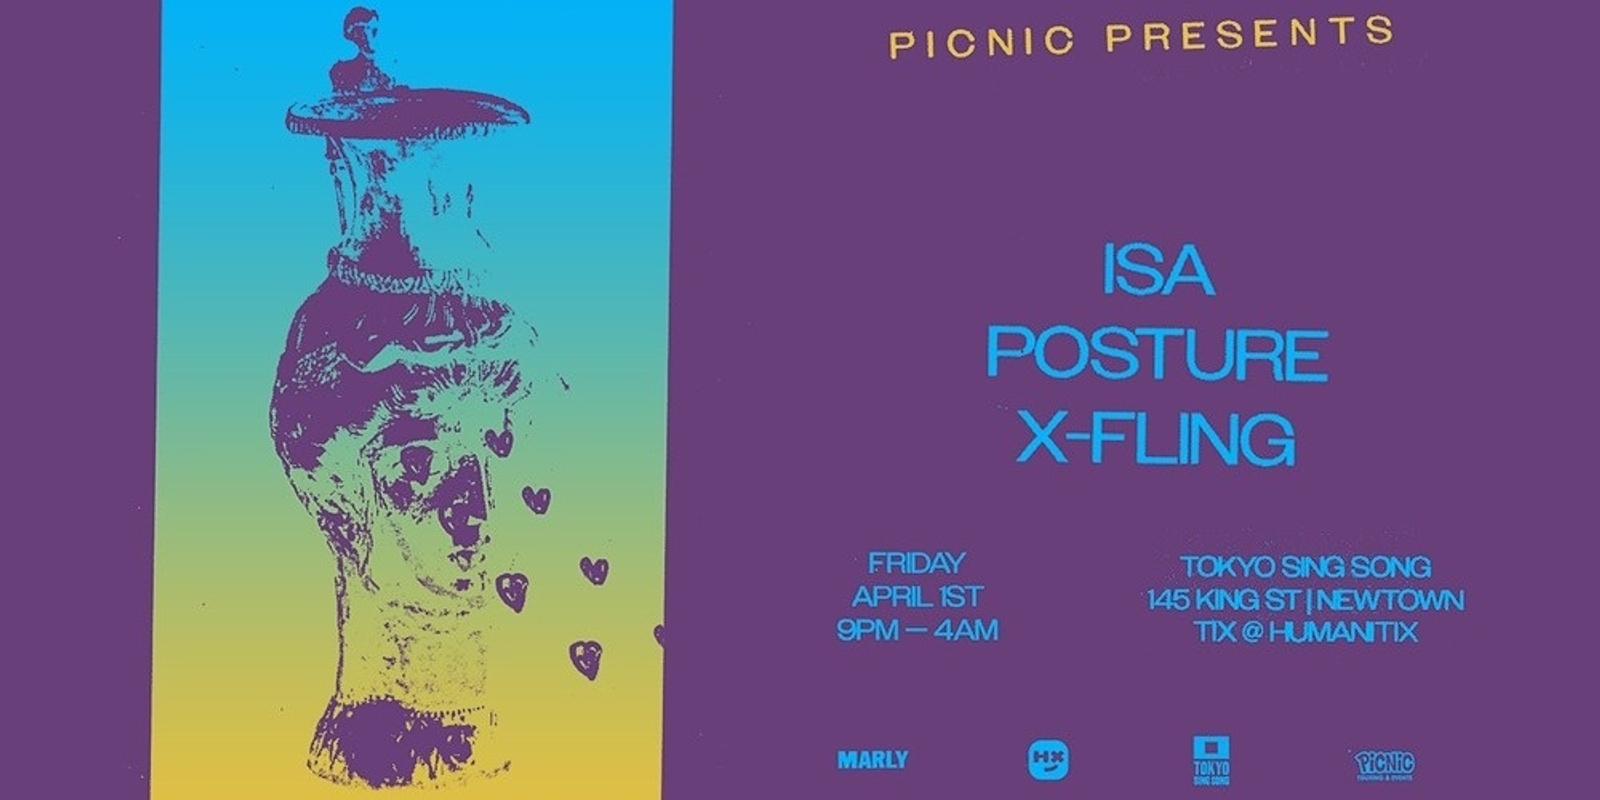 Banner image for Picnic presents ISA, Posture and X-Fling 